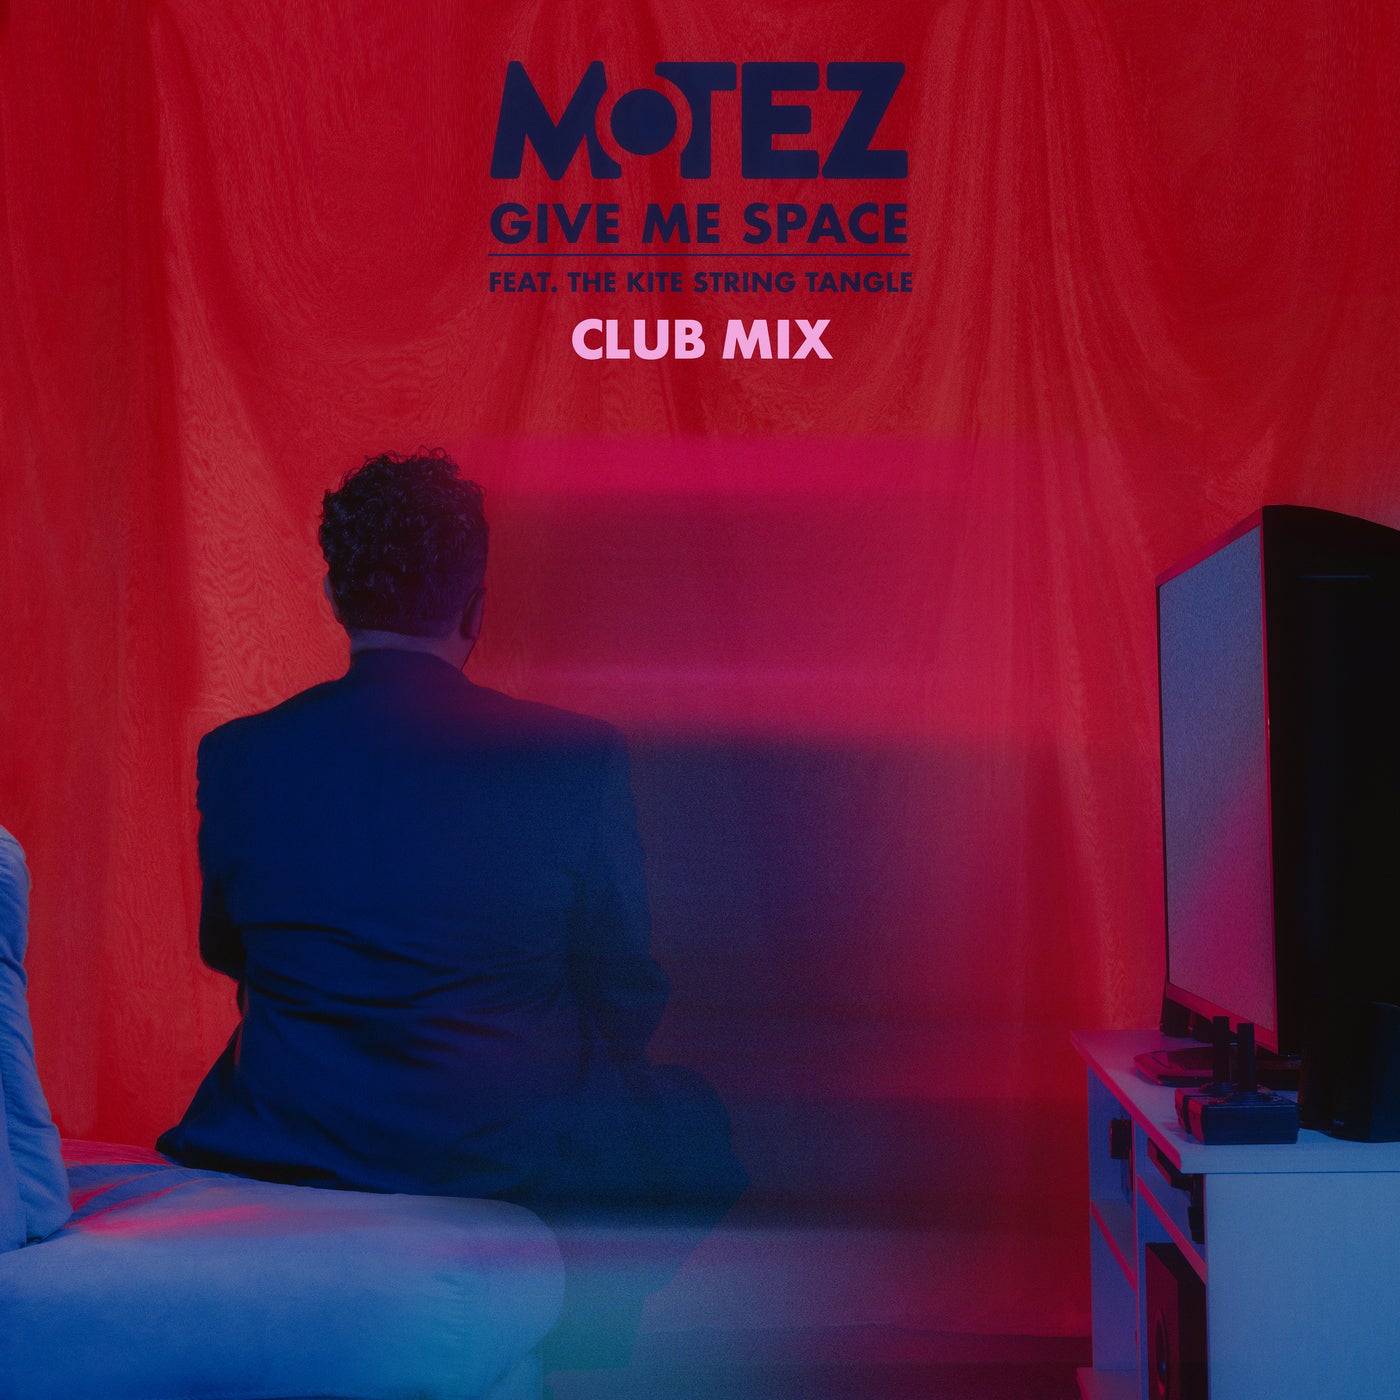 Motez – Give Me Space (feat. The Kite String Tangle) [Club Mix] [SWEATDS534]